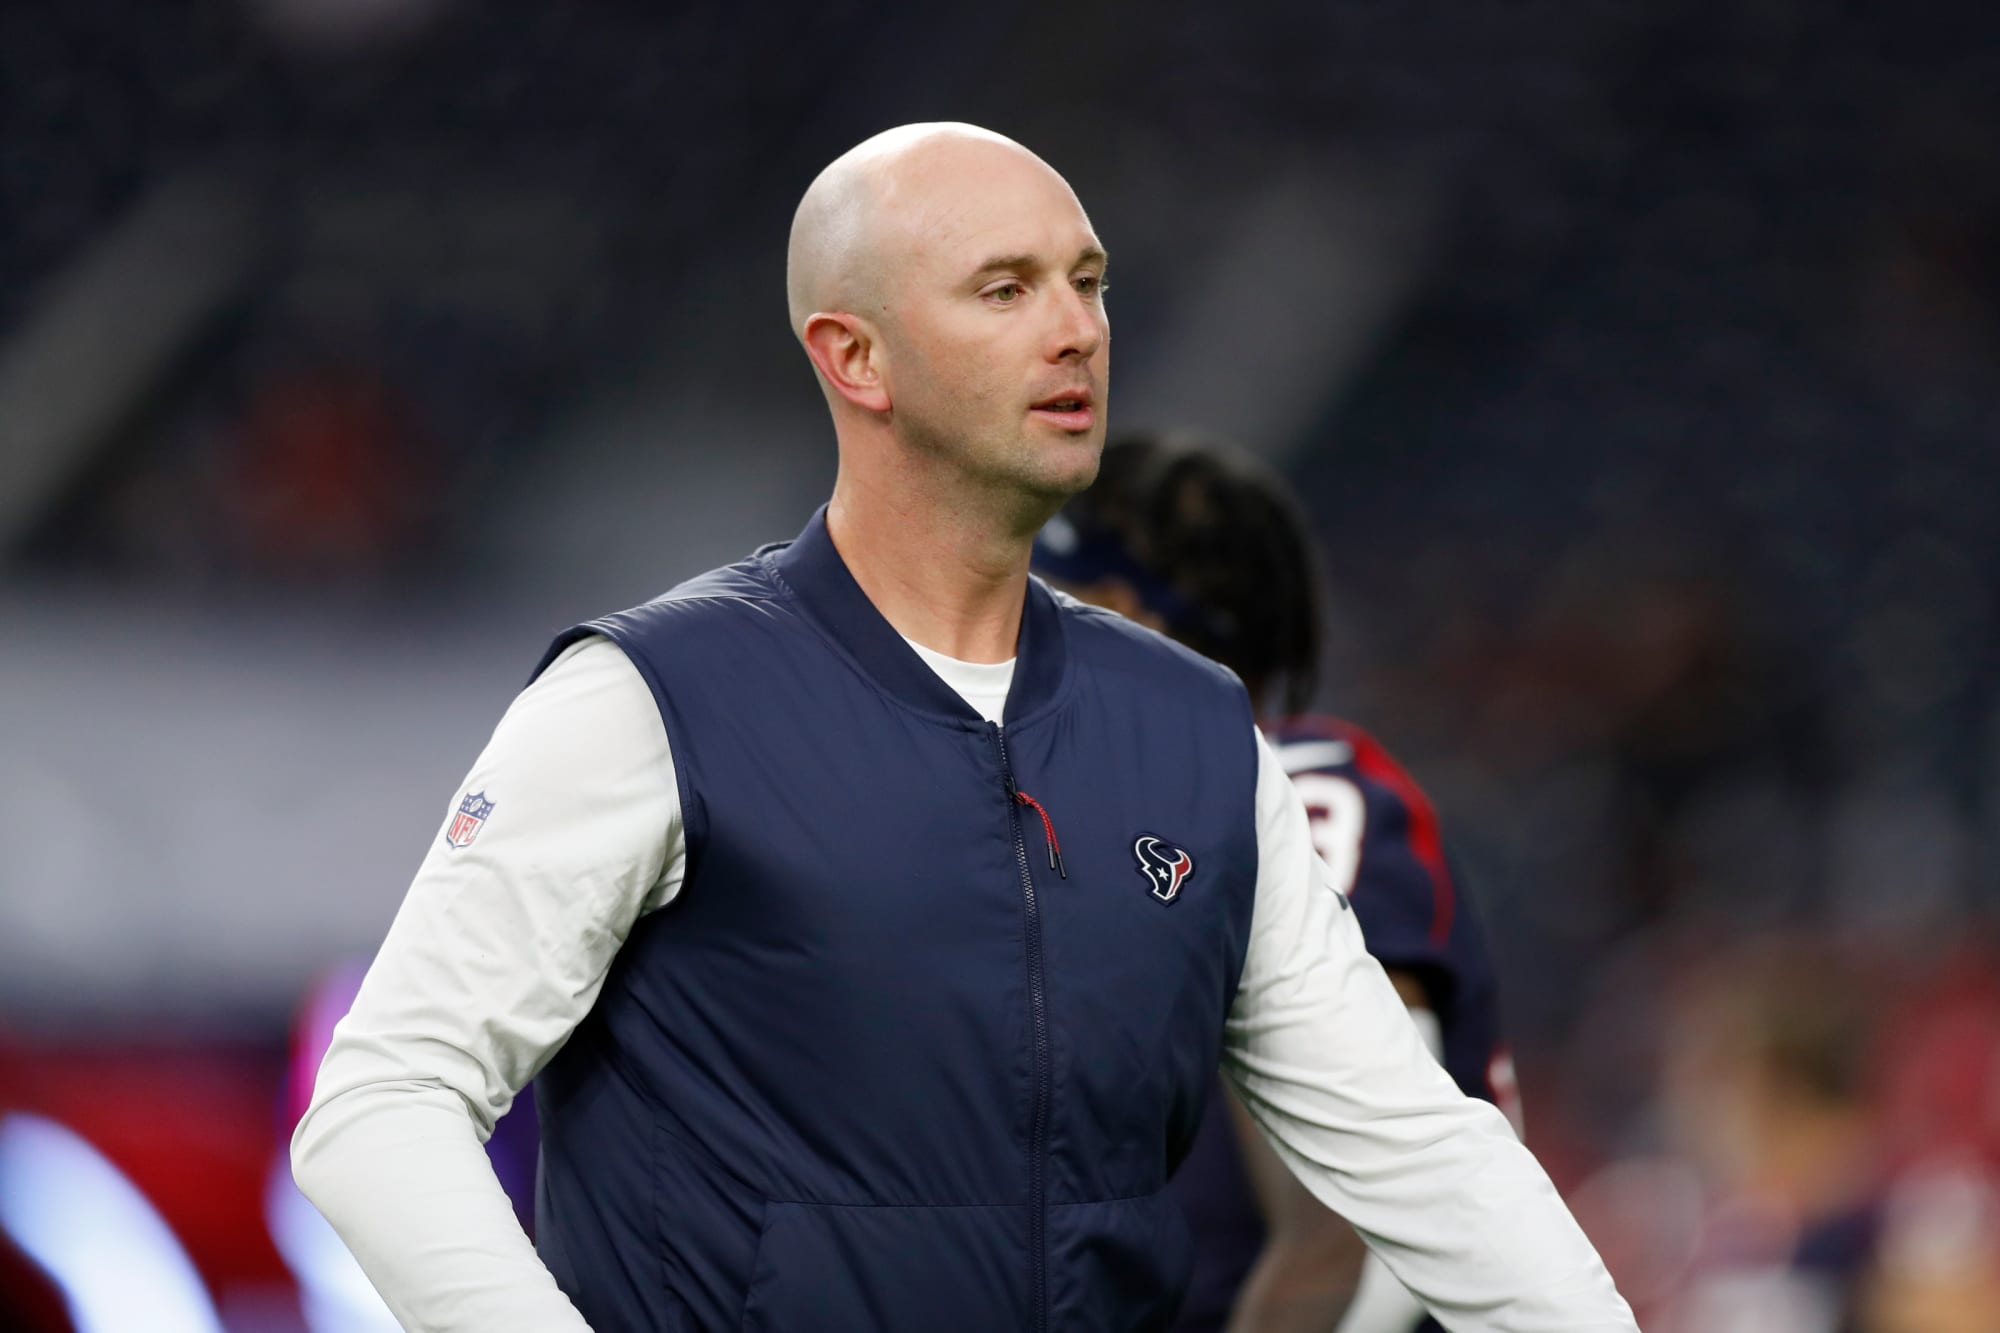 Houston rejoices as Texans finally rid themselves of Jack Easterby